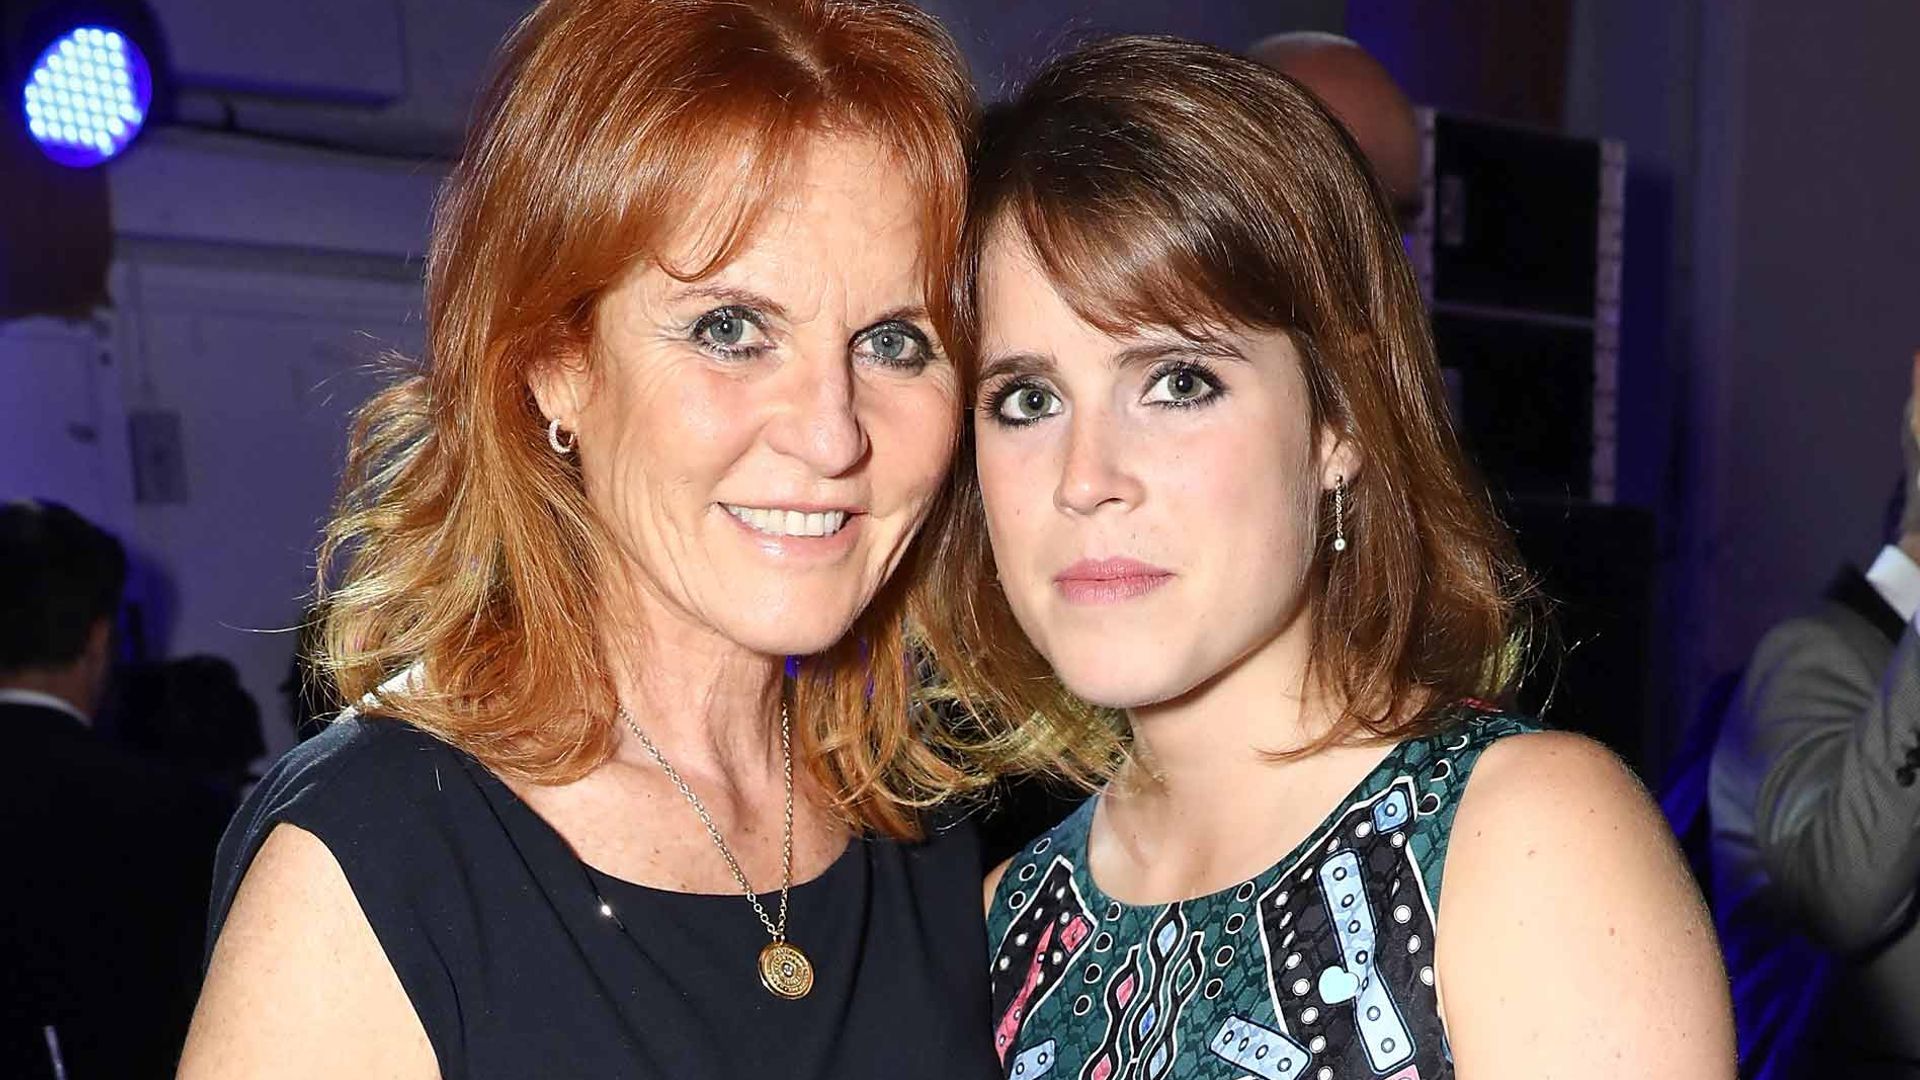 Sarah Ferguson's lockdown baking project with Princess Eugenie has special significance